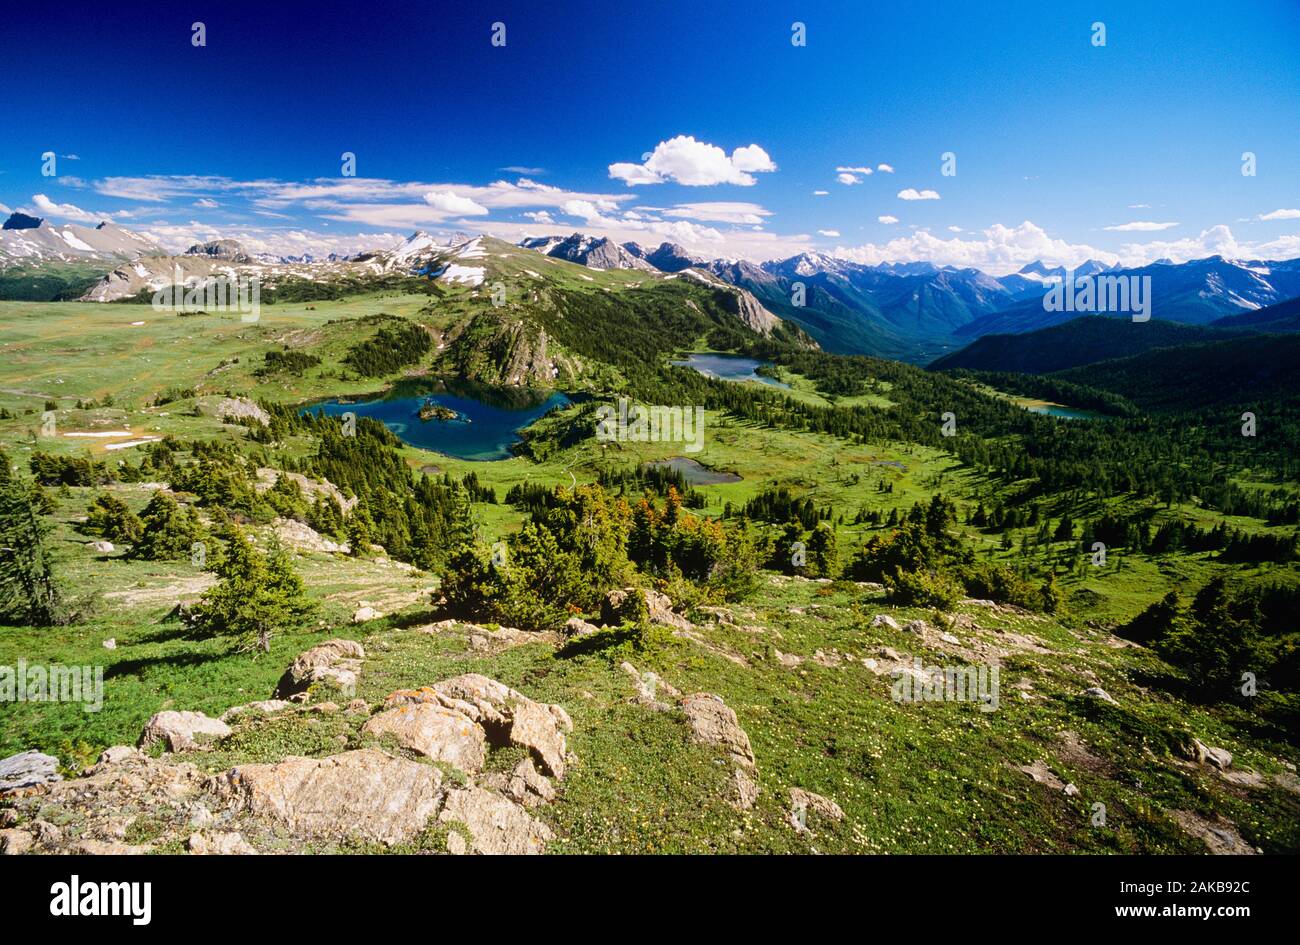 Landscape with view of Sunshine Meadows, Mount Assiniboine Provincial Park, British Columbia, Canada Stock Photo